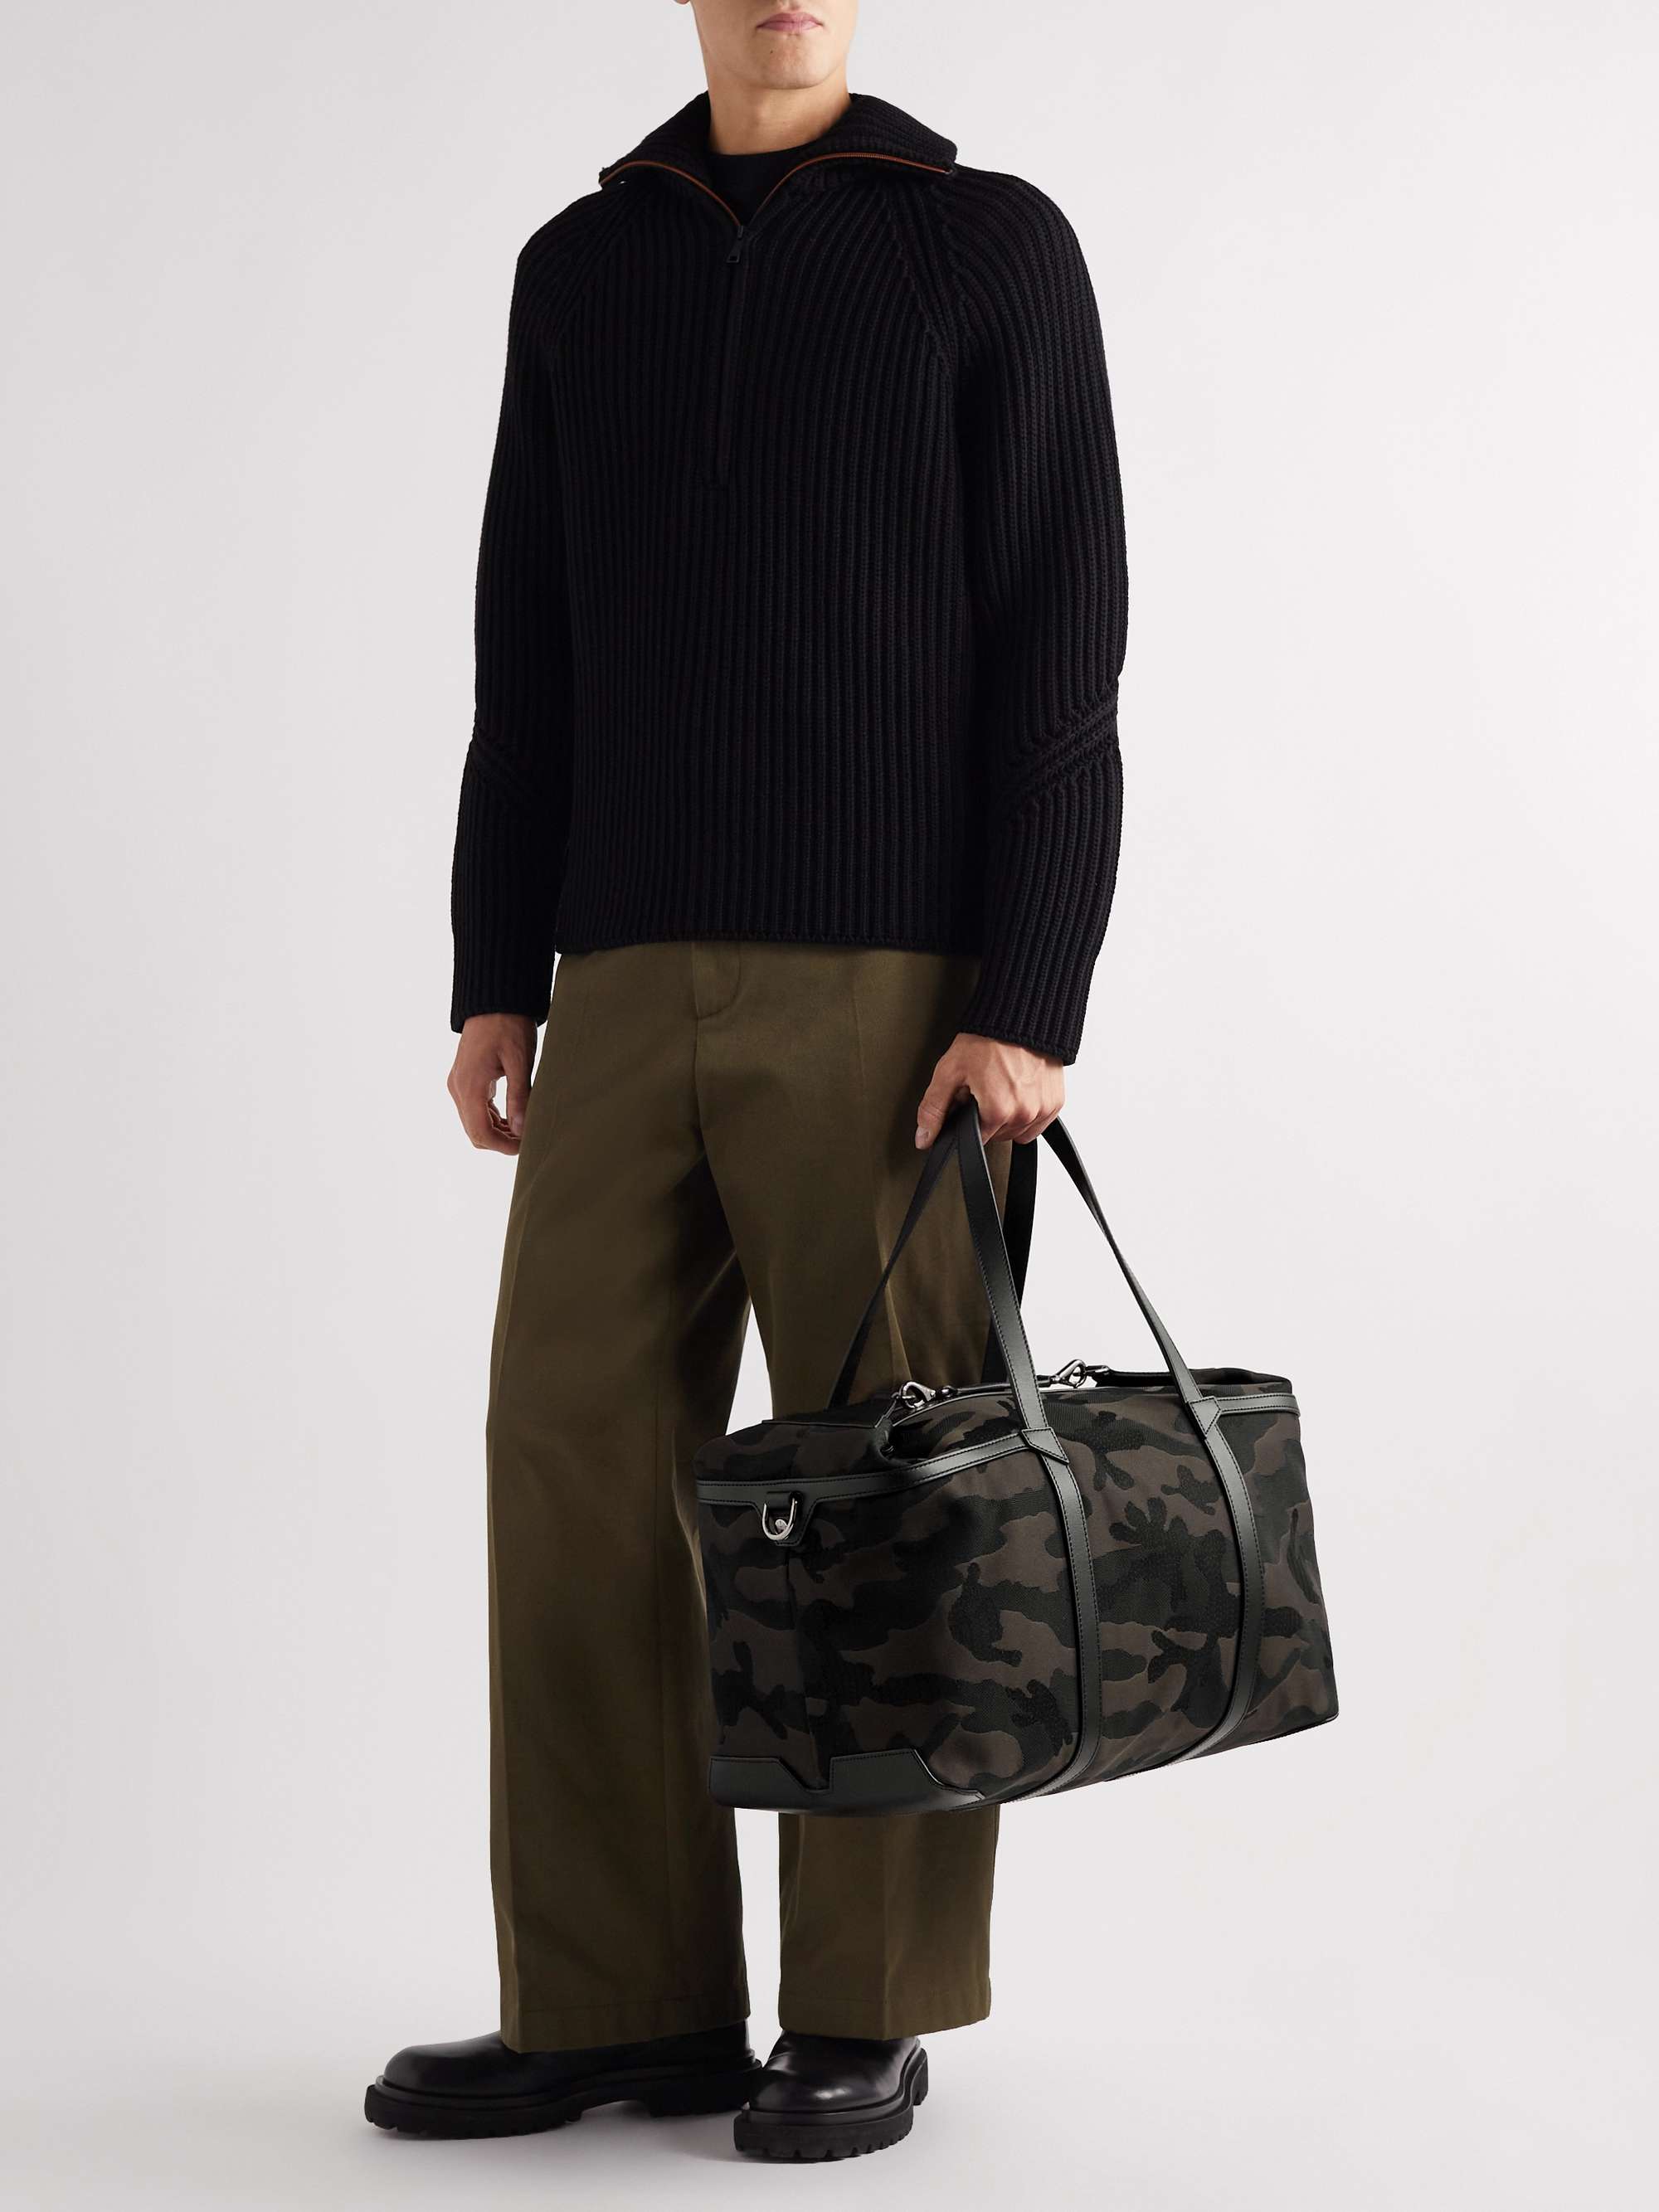 MISMO M/S Tour Leather-Trimmed Camouflage-Jacquard Holdall